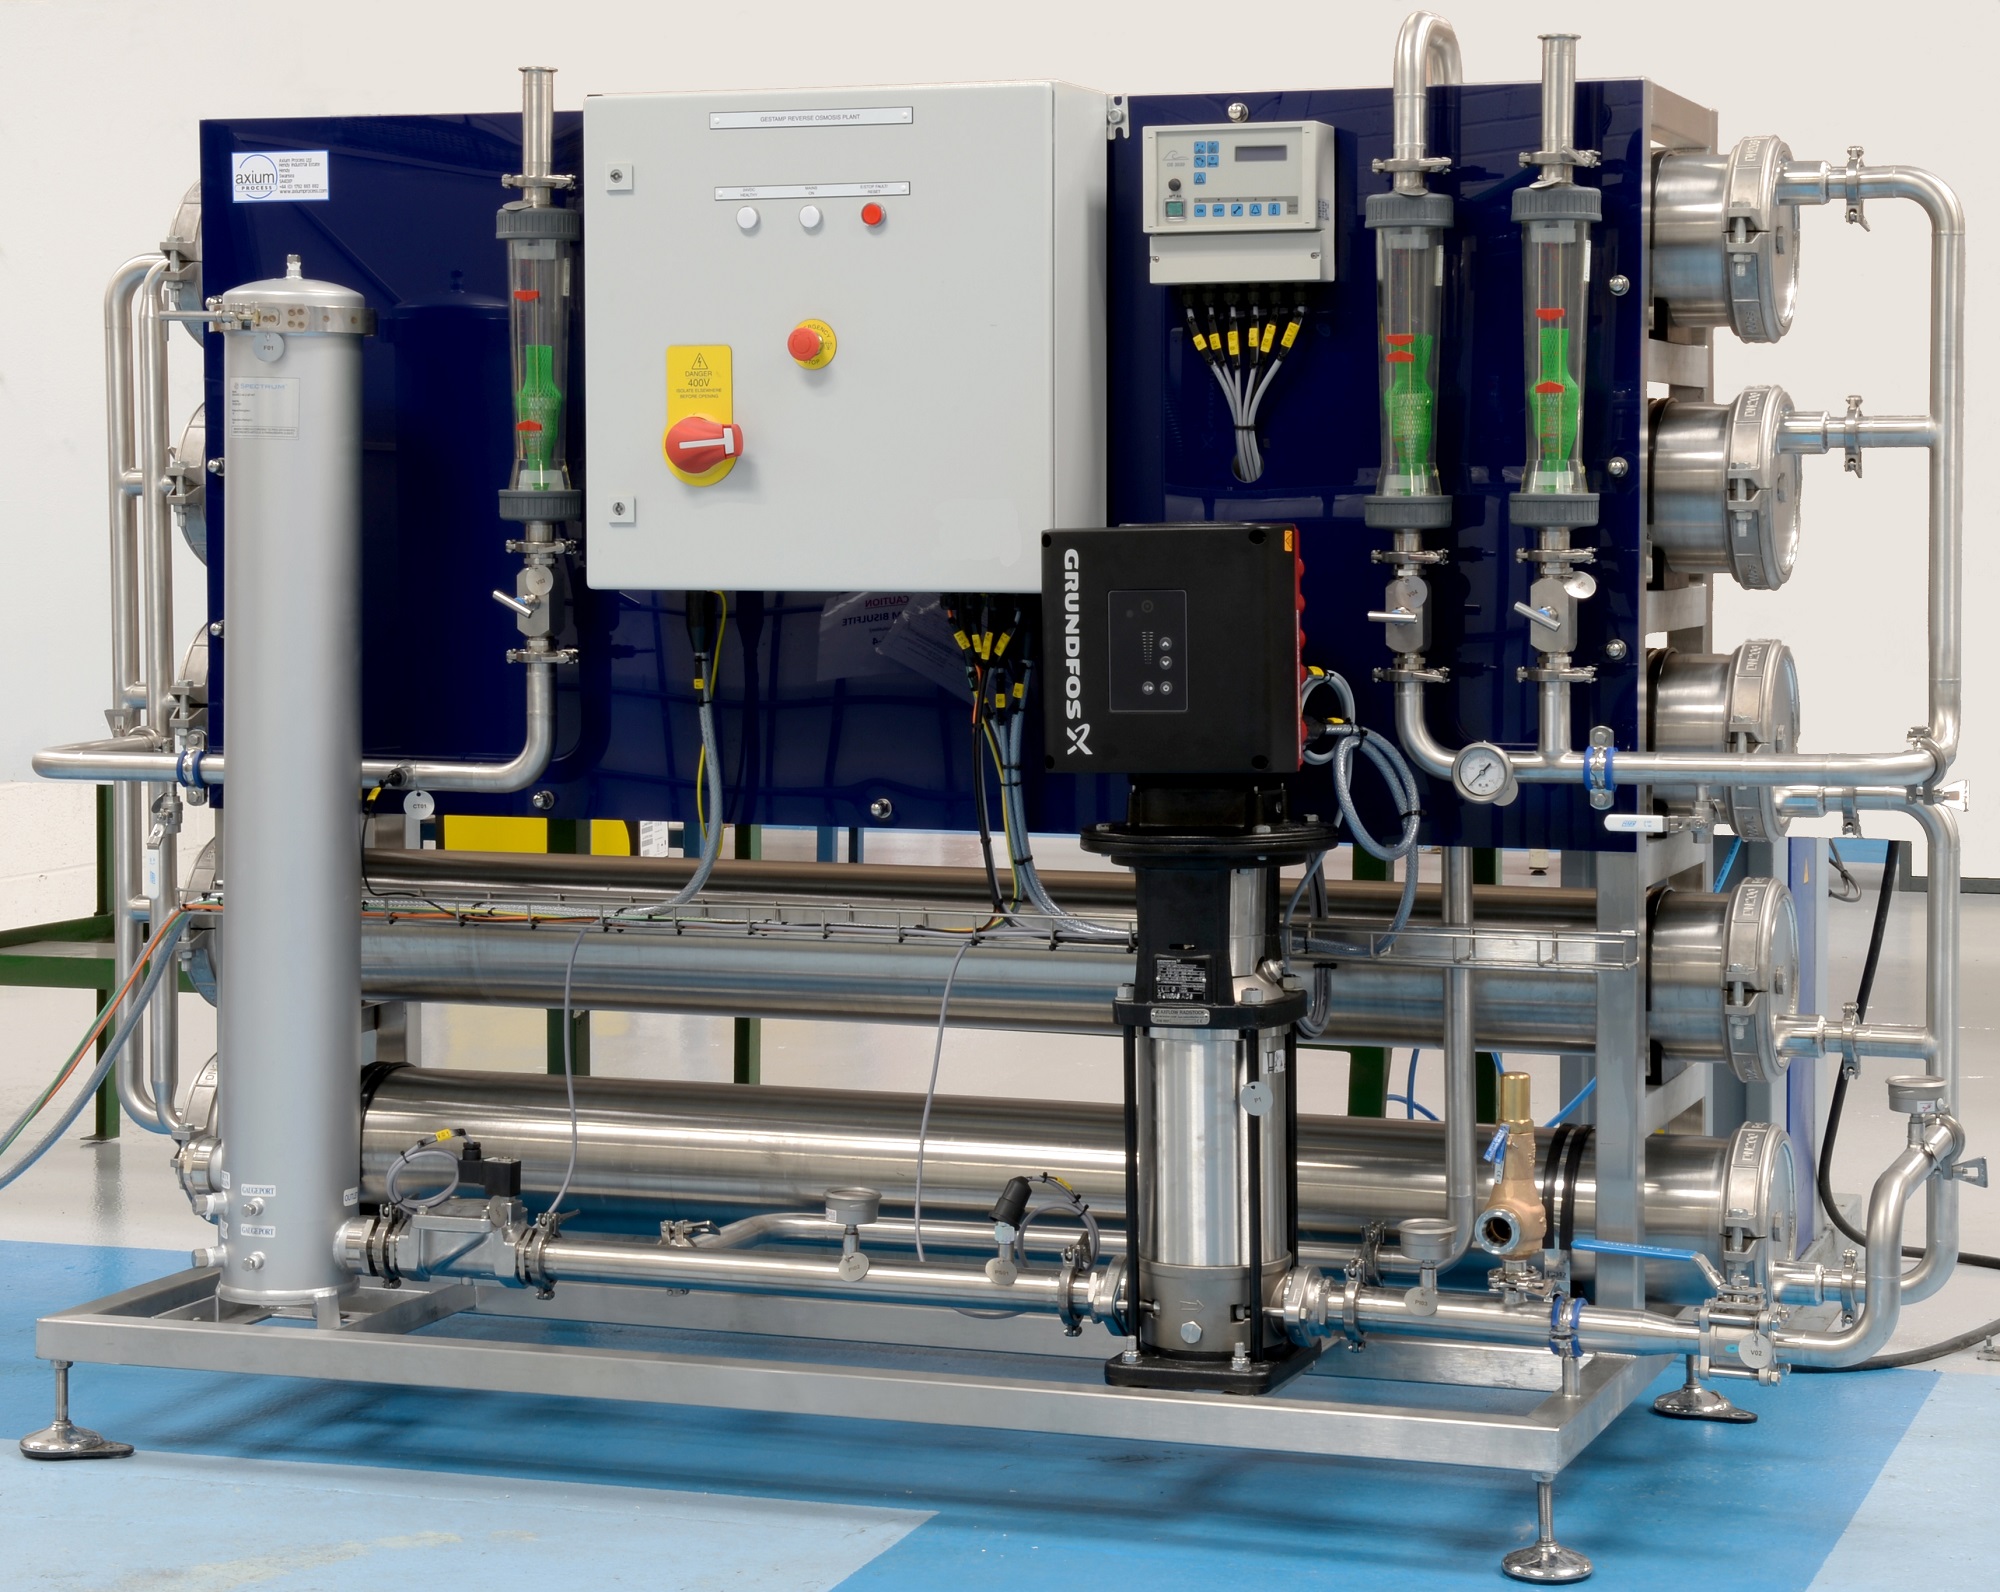 Axium Process' new packaged low conductivity water system is designed for water purifying applications.